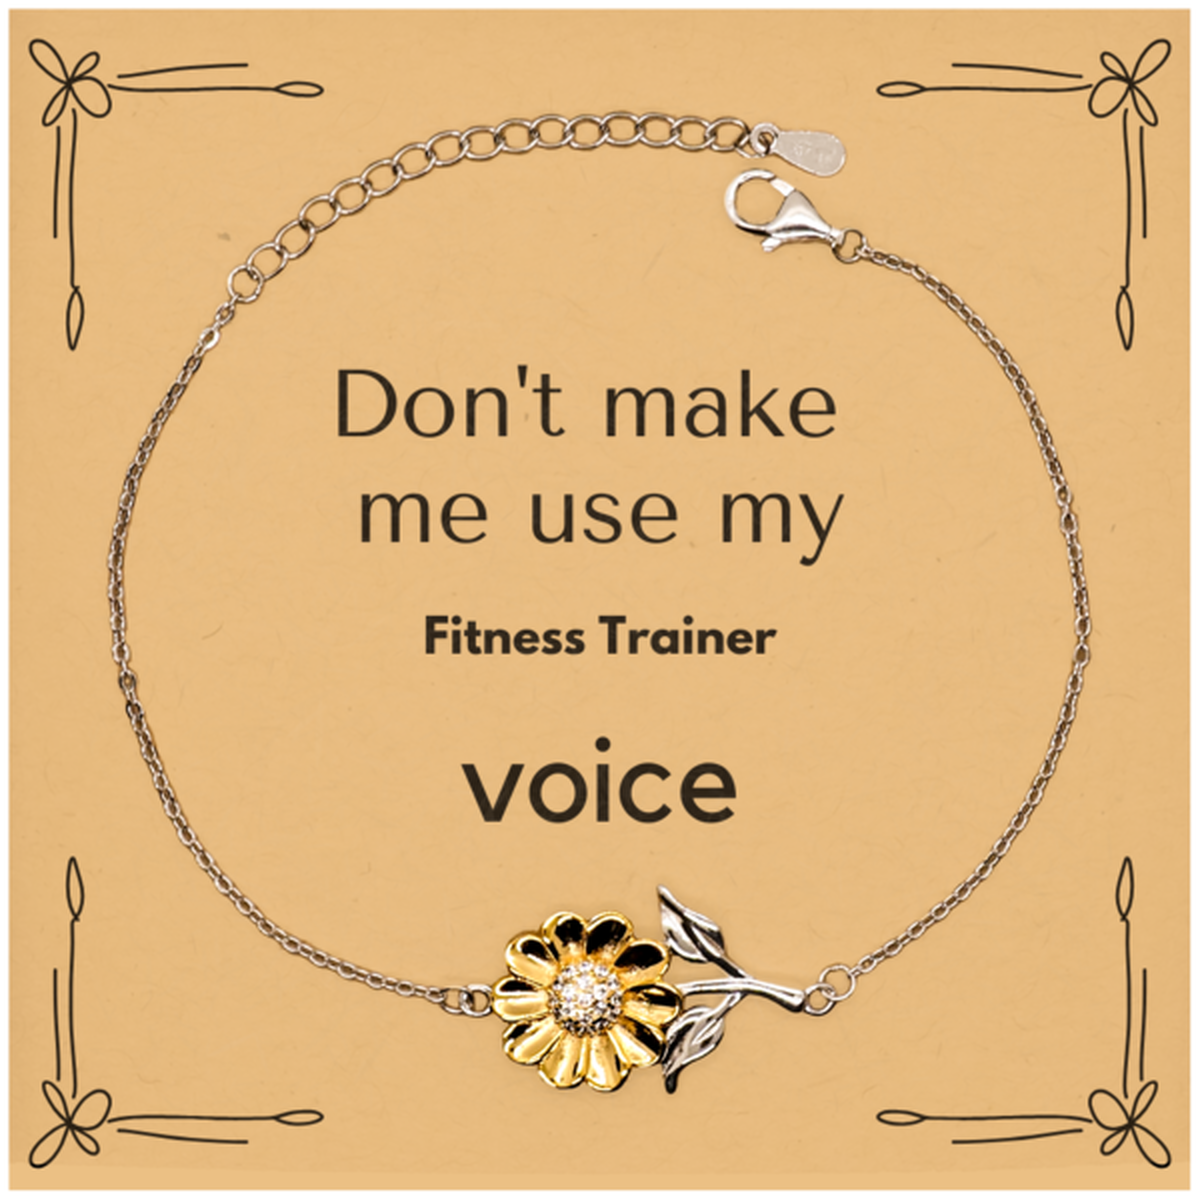 Don't make me use my Fitness Trainer voice, Sarcasm Fitness Trainer Card Gifts, Christmas Fitness Trainer Sunflower Bracelet Birthday Unique Gifts For Fitness Trainer Coworkers, Men, Women, Colleague, Friends